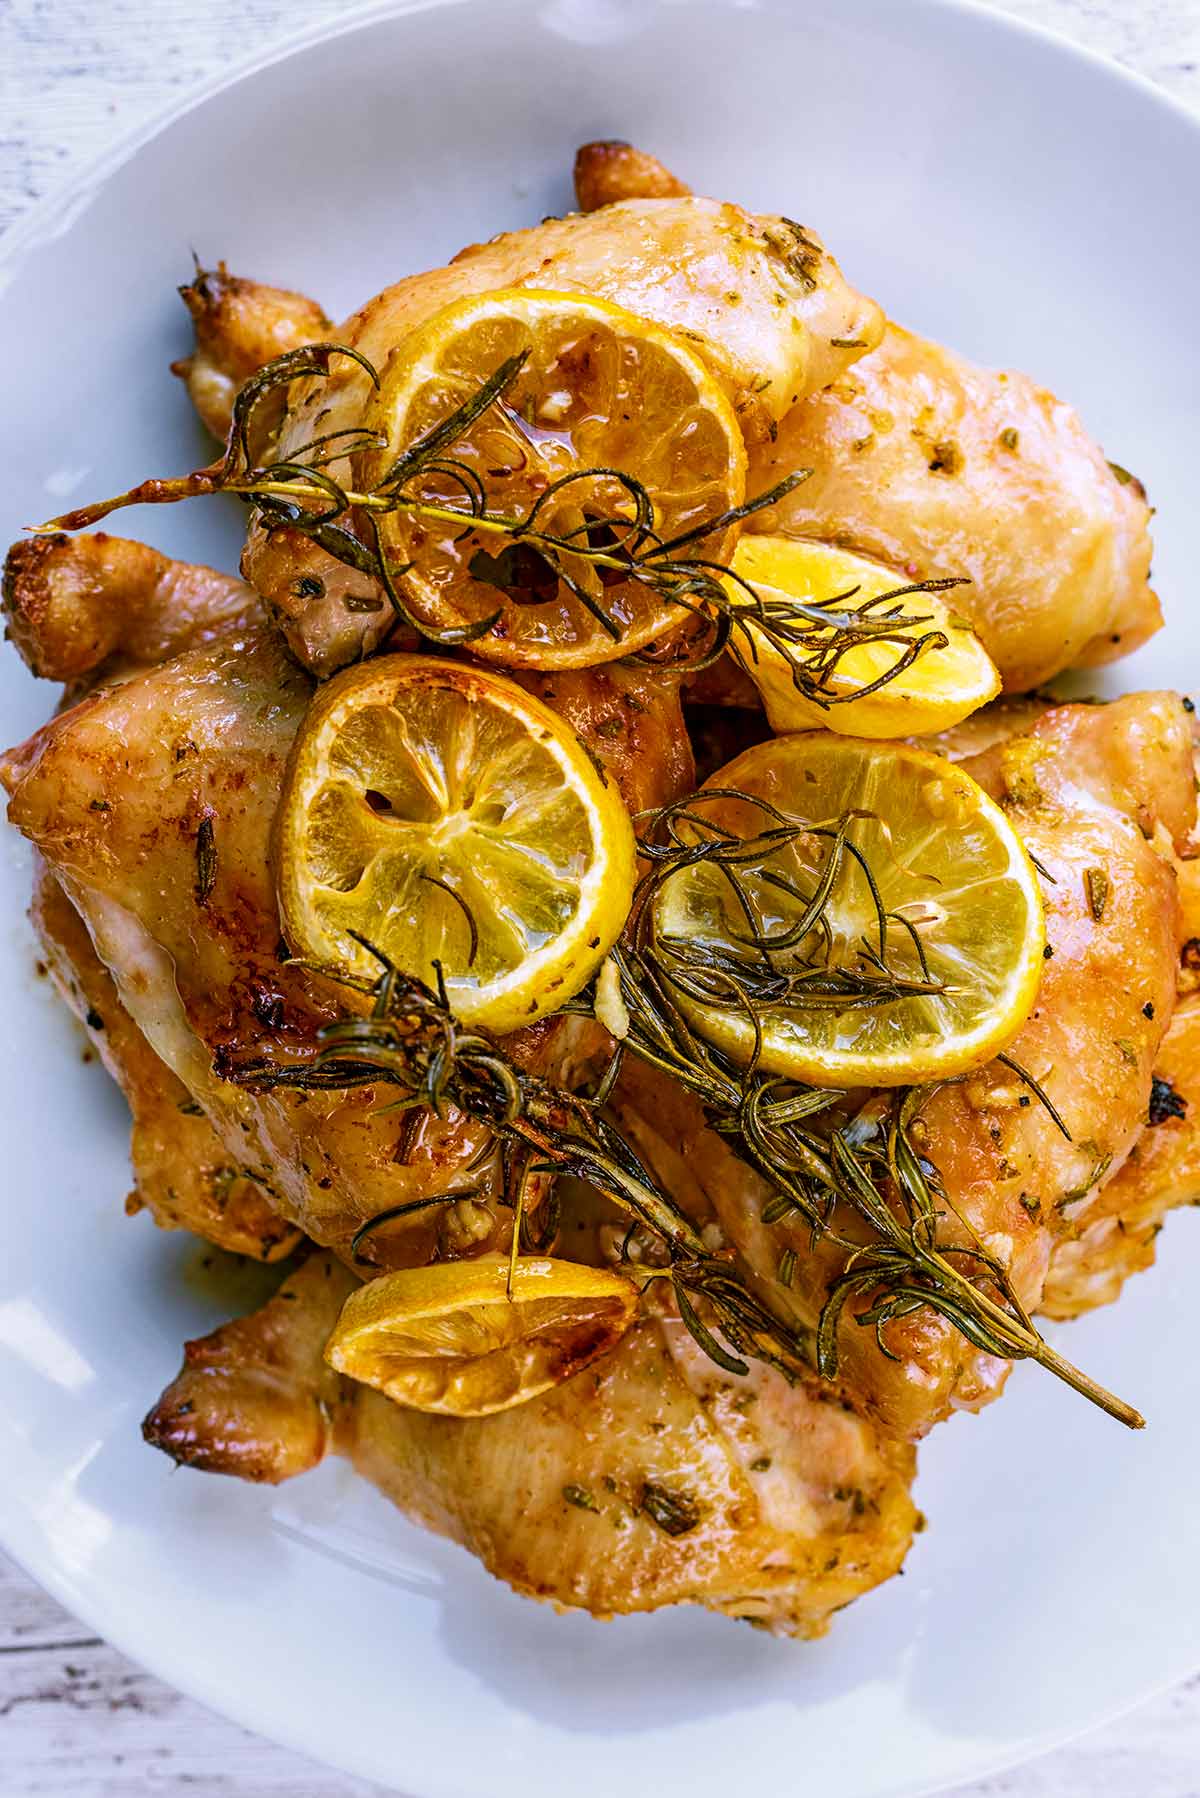 Four baked chicken thighs on a plate with lemon slices and sprigs of rosemary.